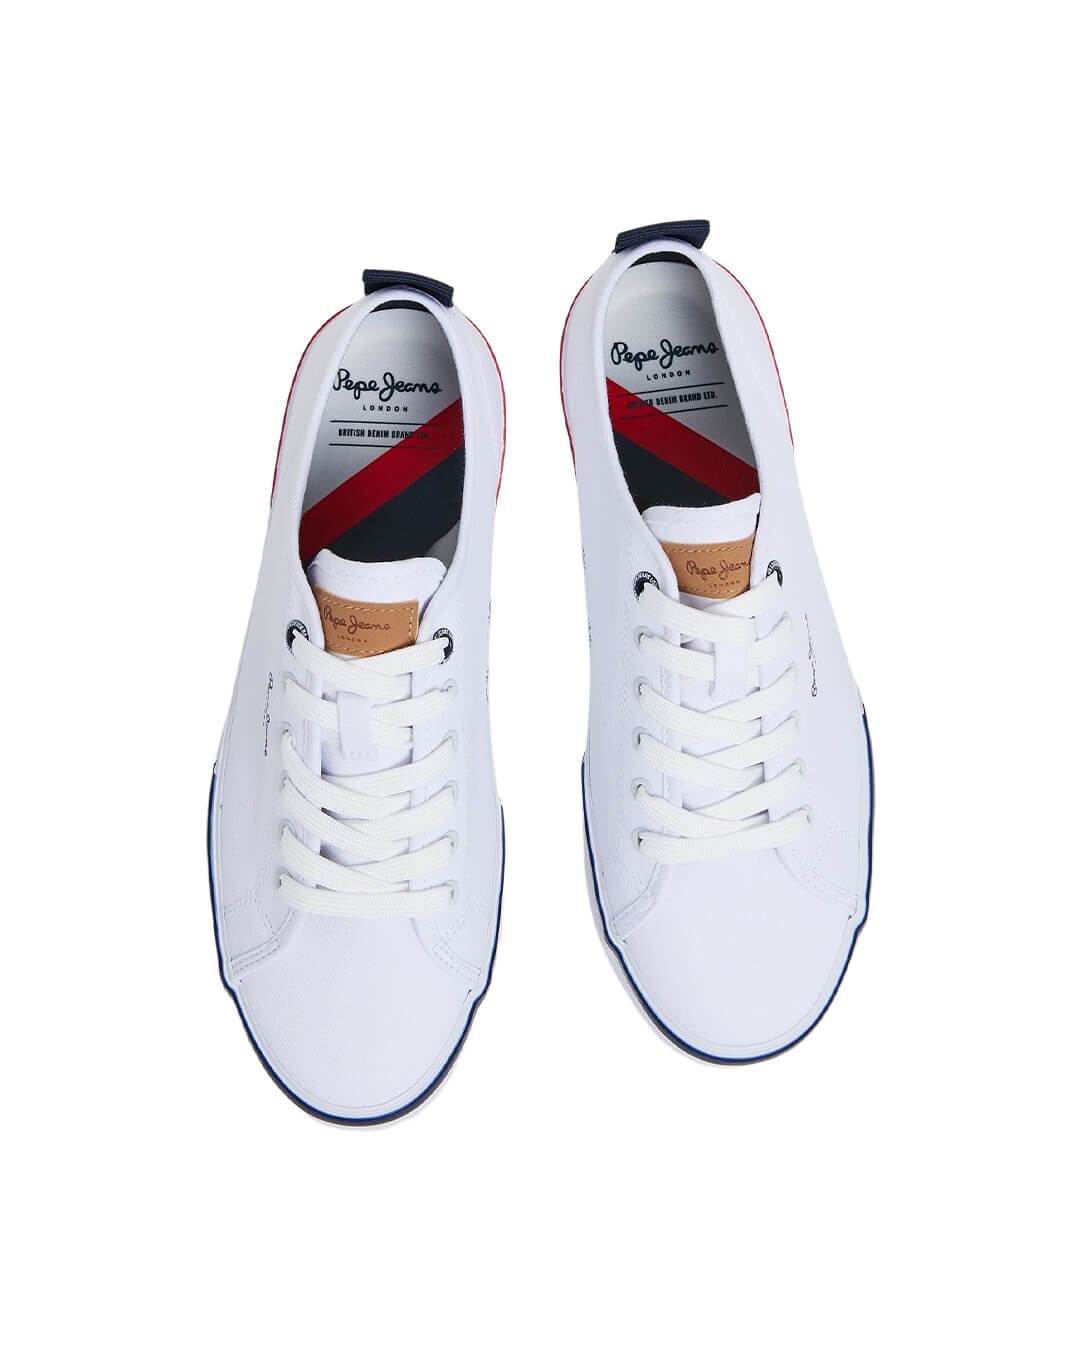 Pepe Jeans Shoes Pepe Jeans White Cupsole Sneakers